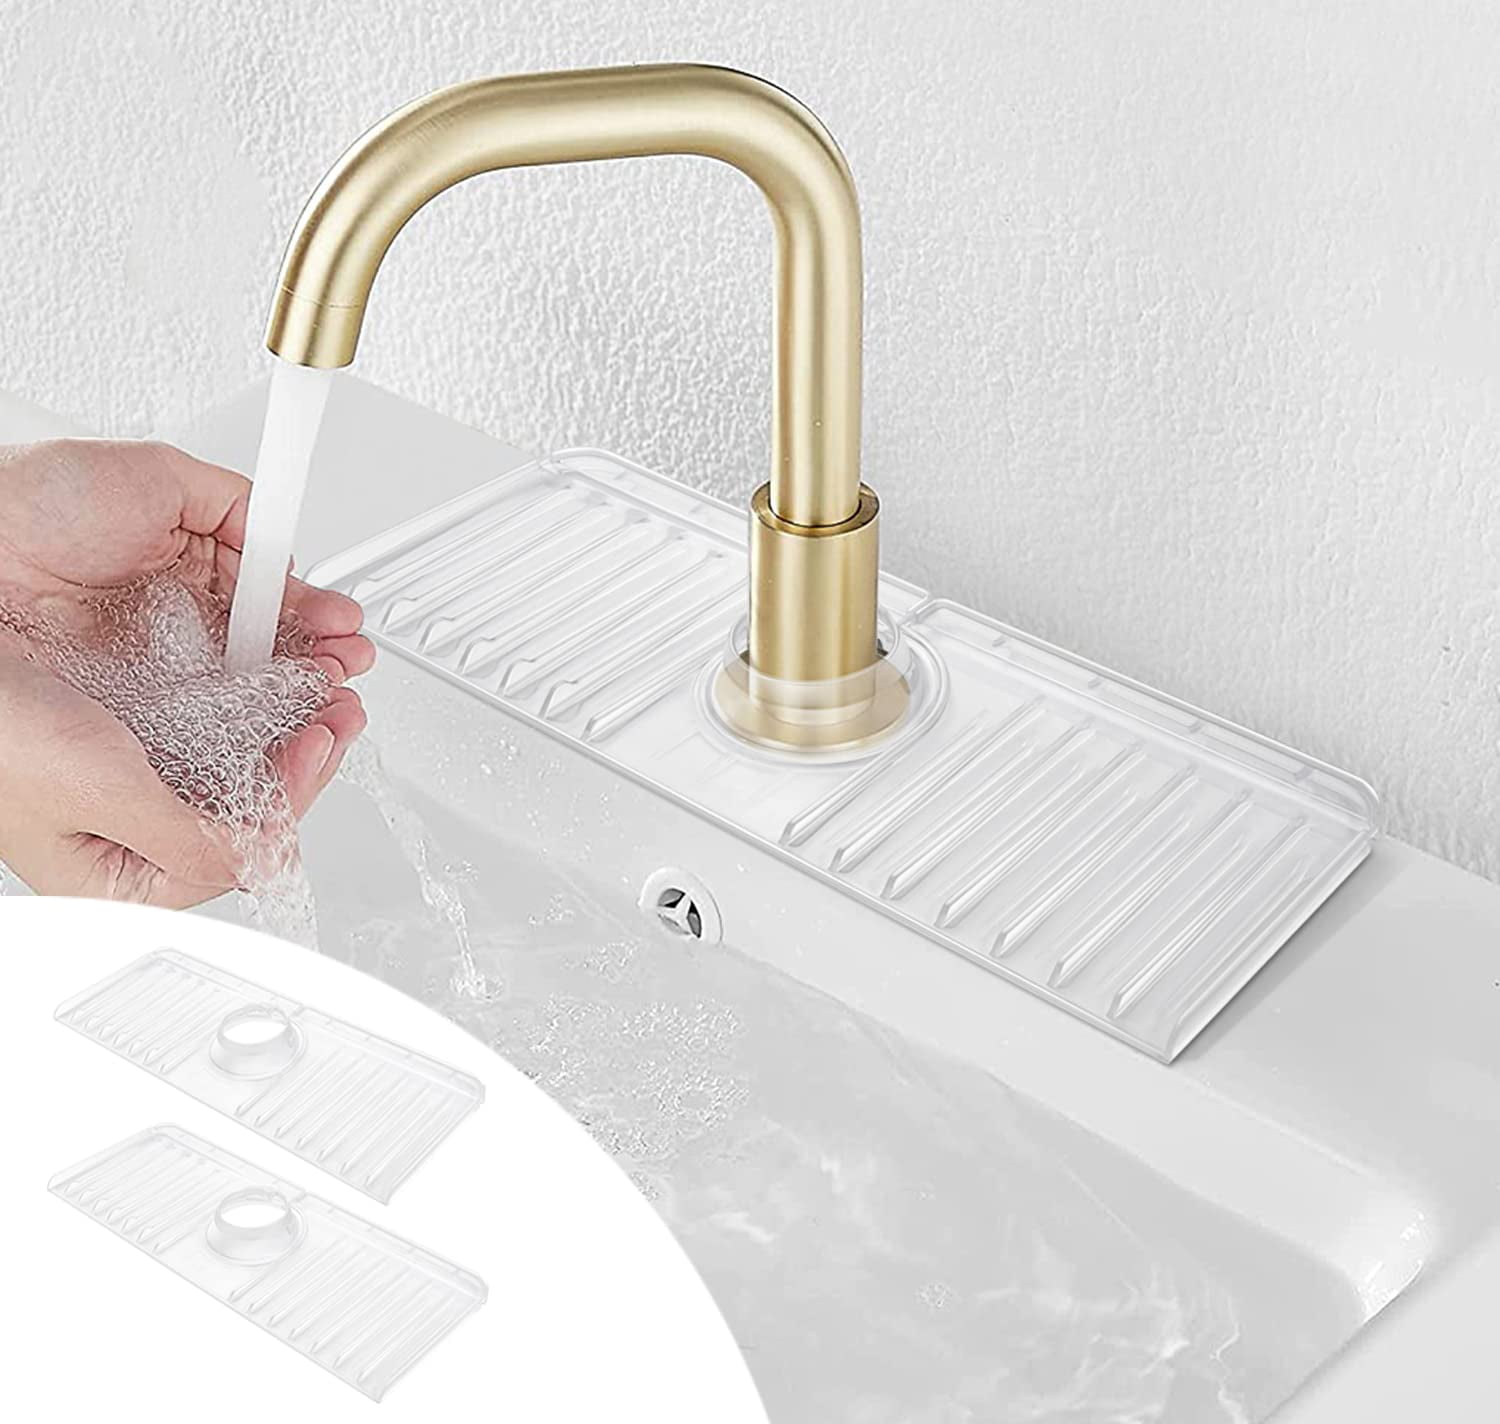 Department Store 1pc Silicone Sink Faucet Mat Kitchen; Bathroom